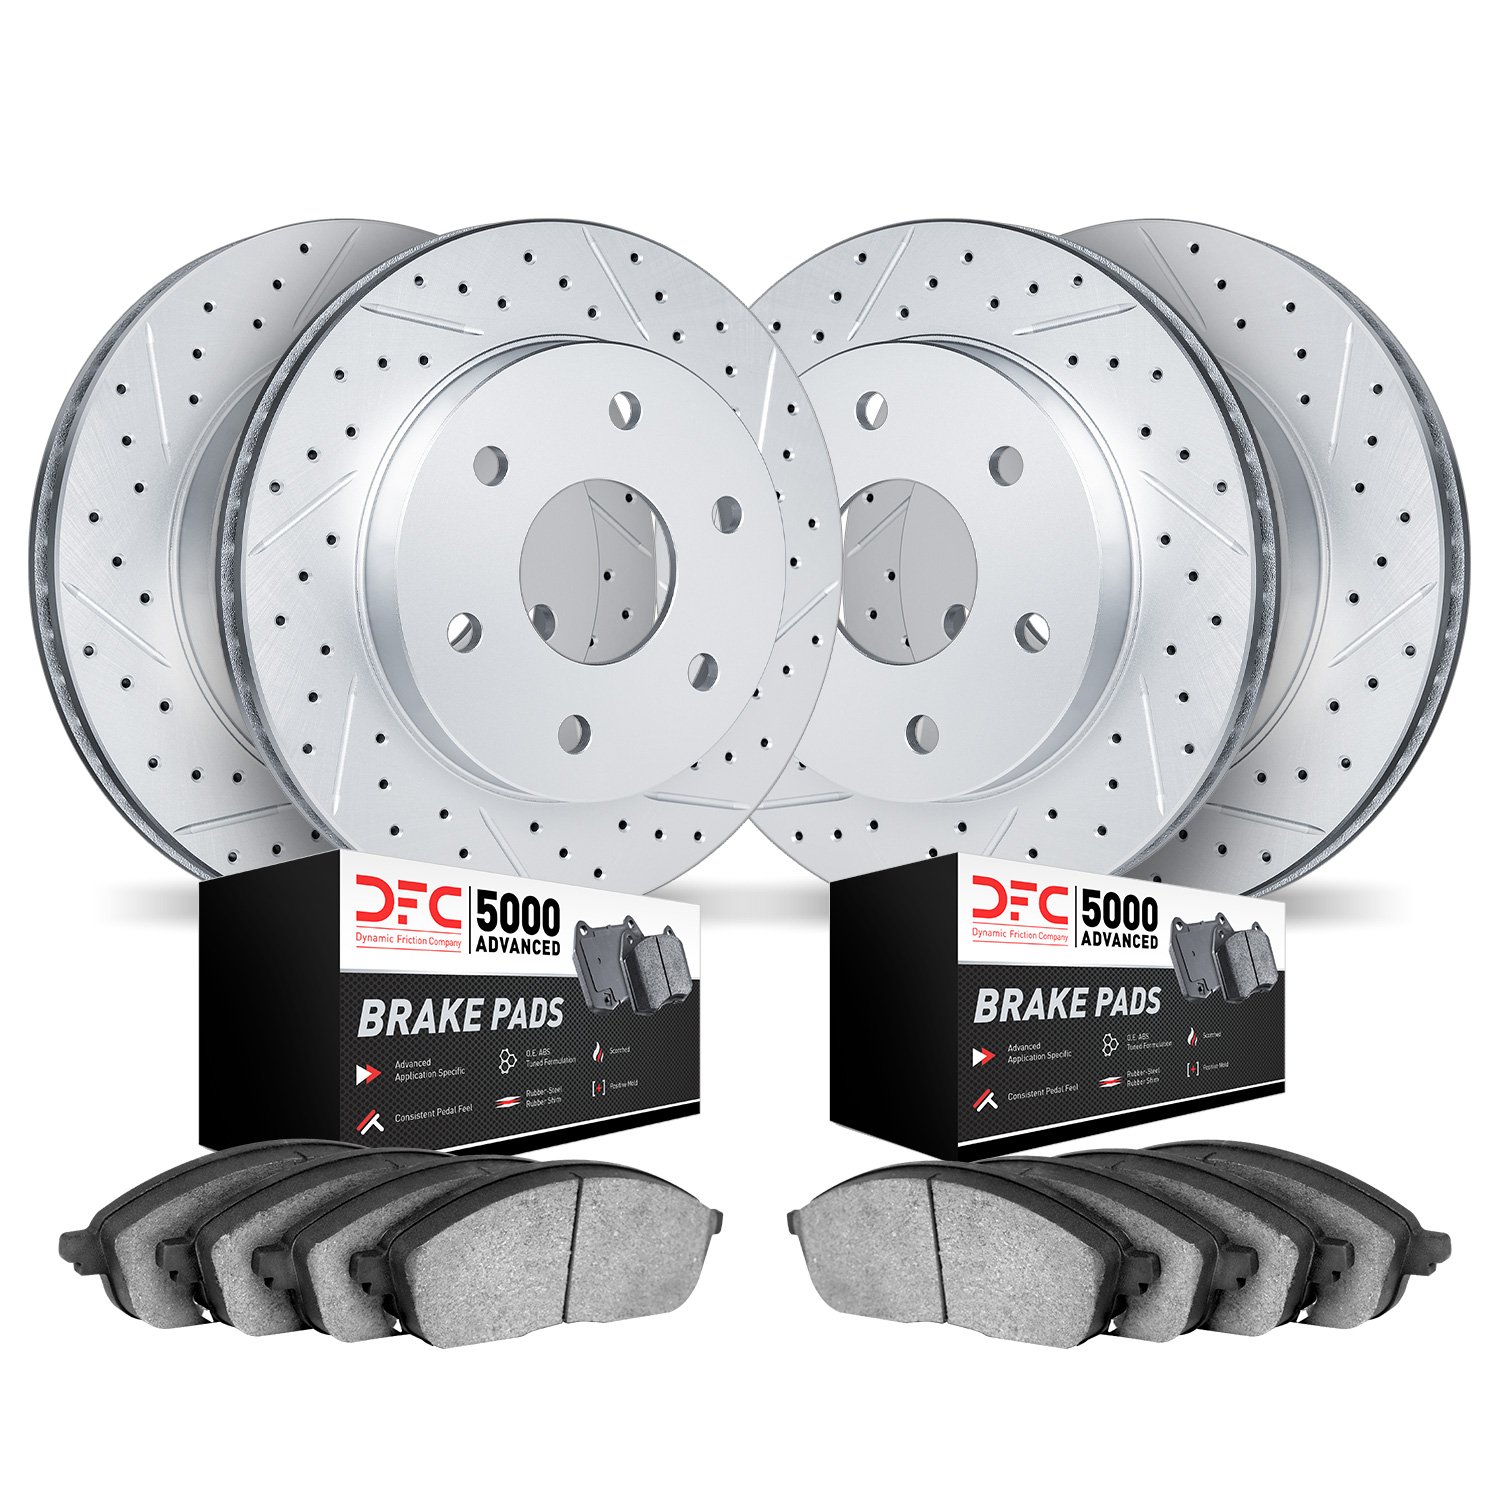 2504-54290 Geoperformance Drilled/Slotted Rotors w/5000 Advanced Brake Pads Kit, 2018-2020 Ford/Lincoln/Mercury/Mazda, Position: